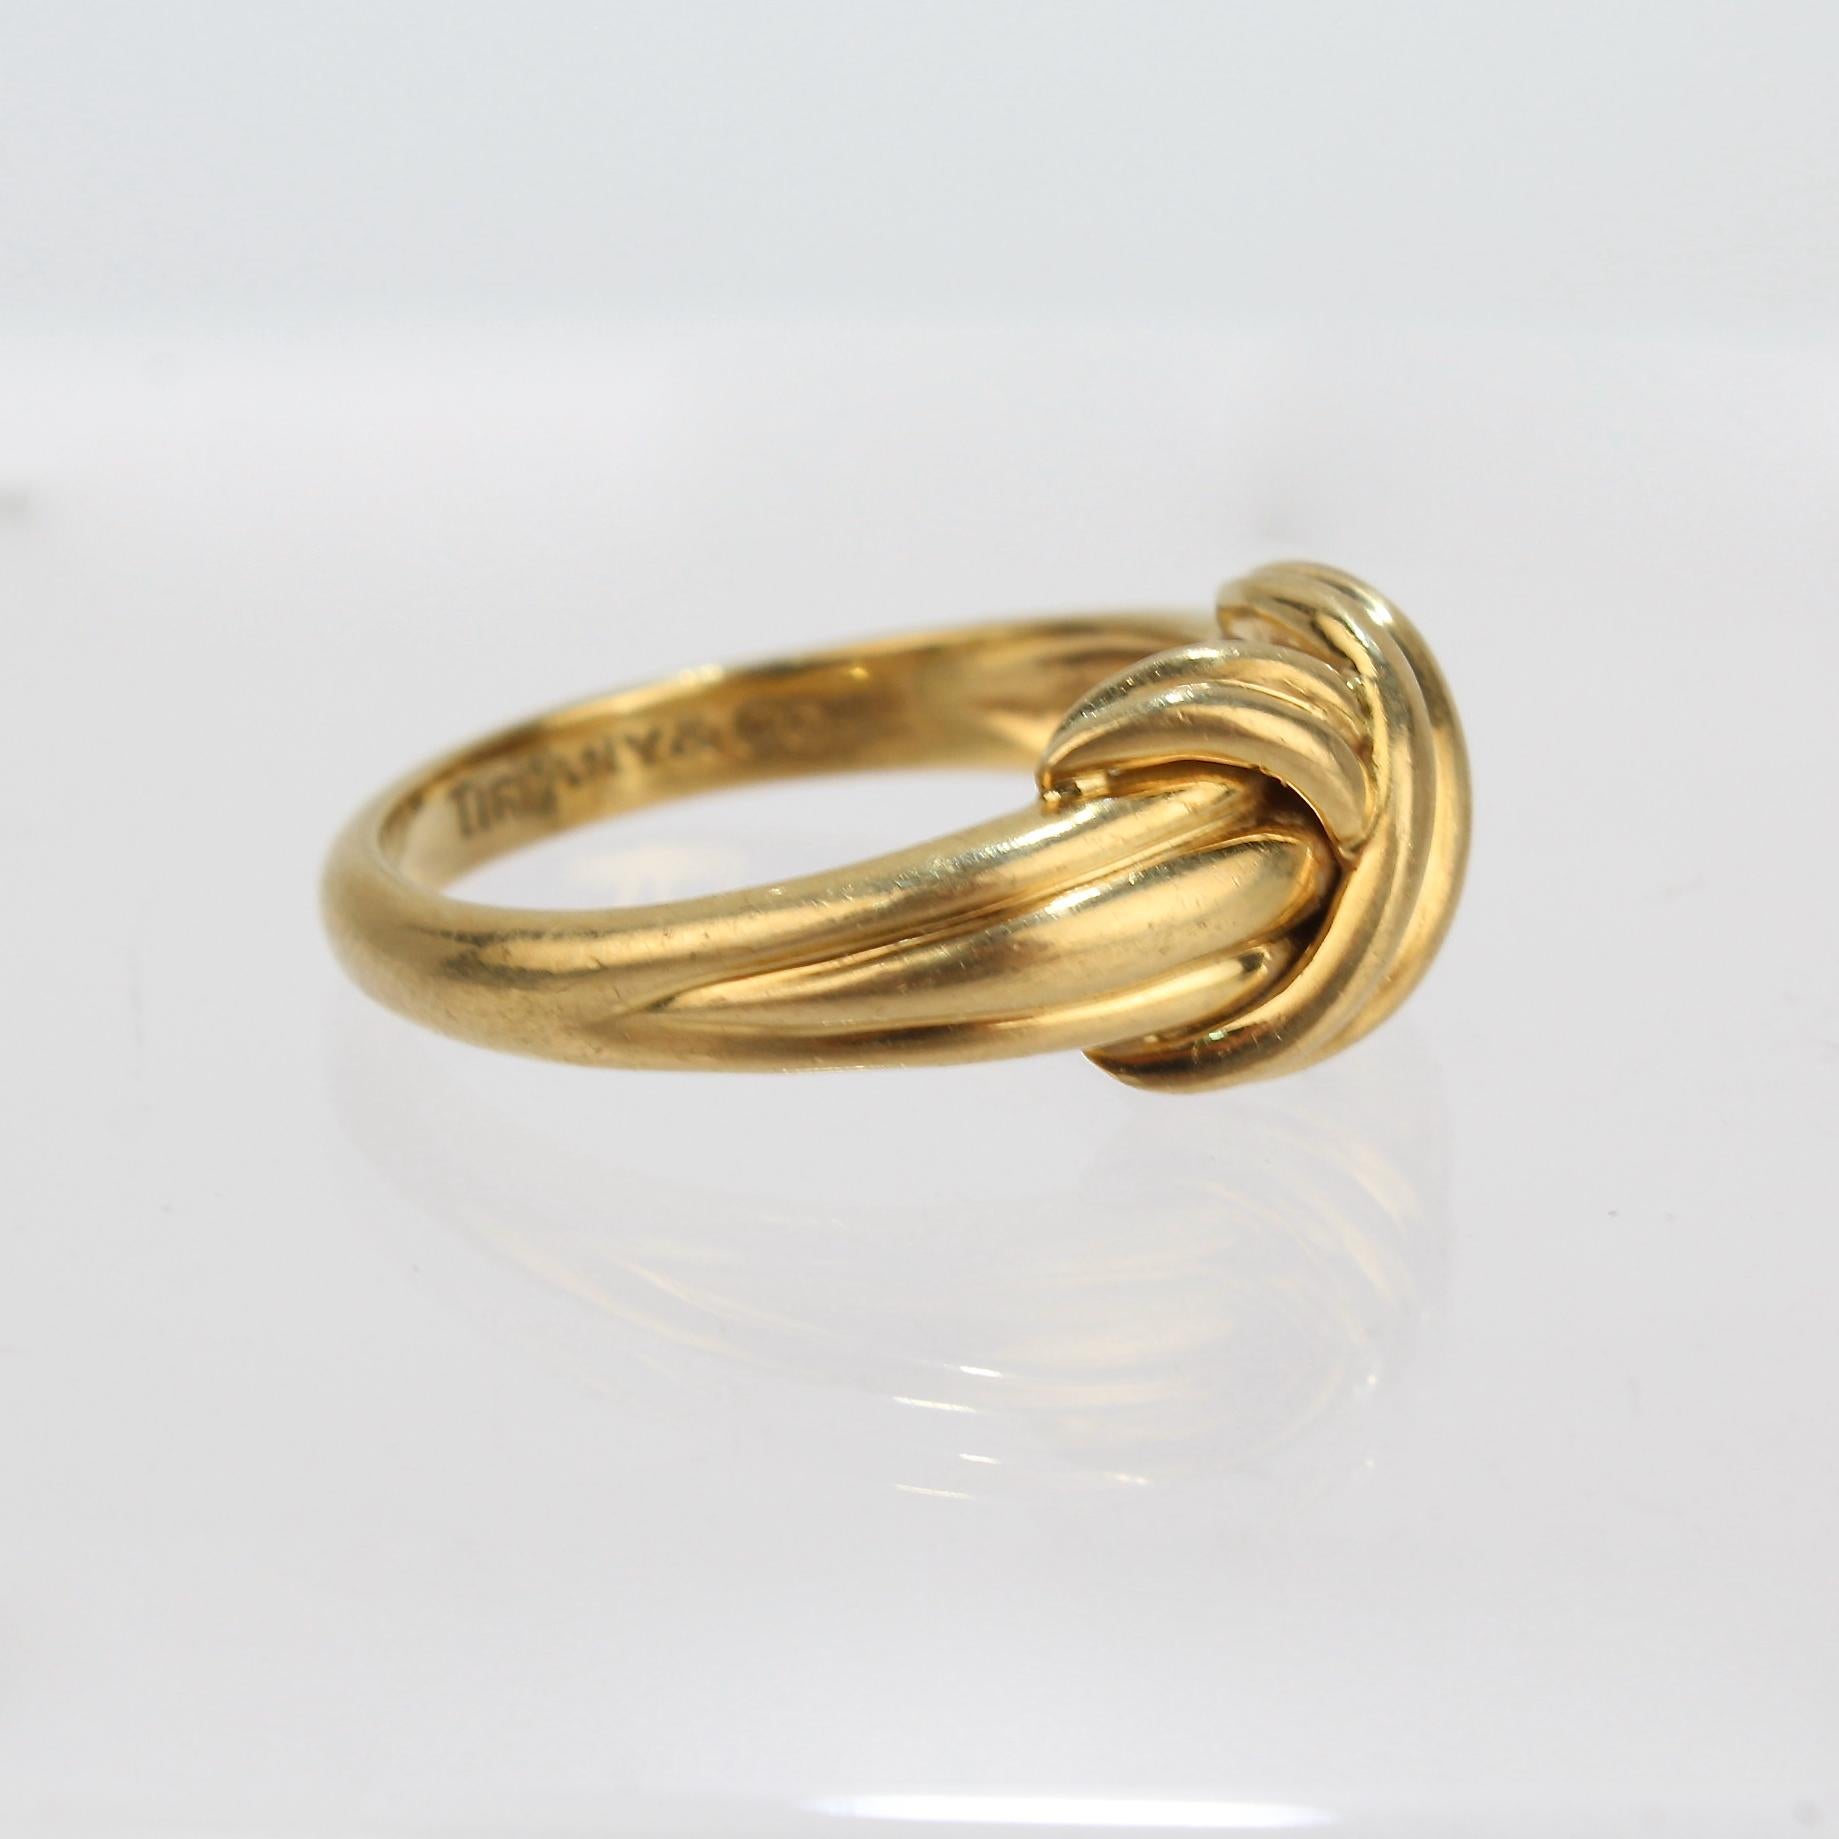 Tiffany & Co. 18 Karat Gold 'X' Ring  In Good Condition For Sale In Philadelphia, PA